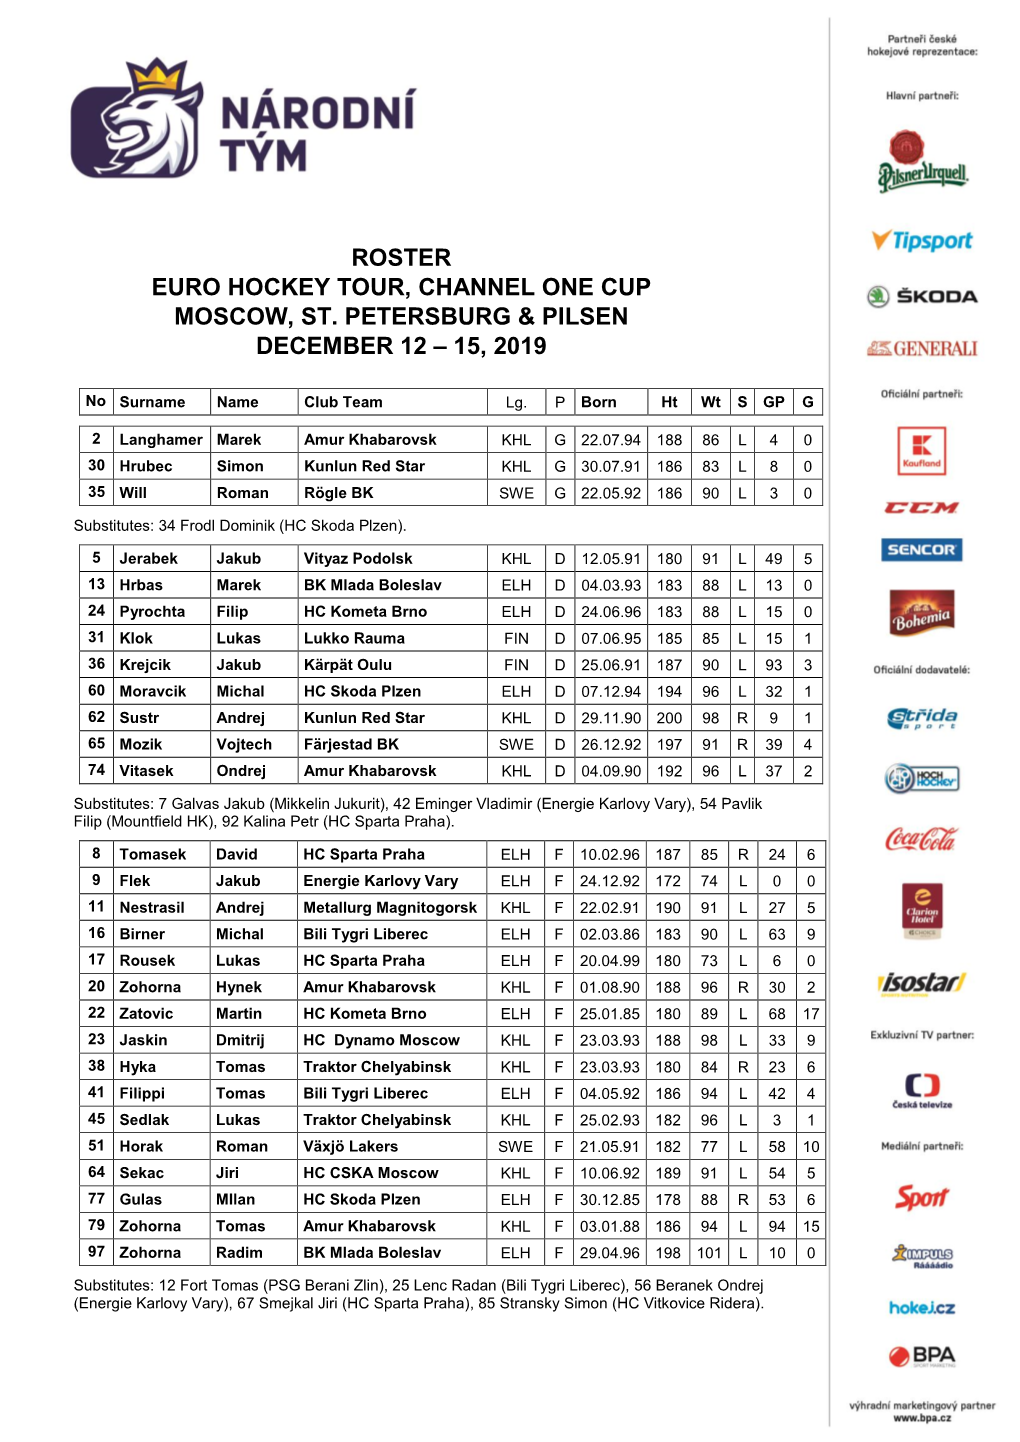 Roster Euro Hockey Tour, Channel One Cup Moscow, St